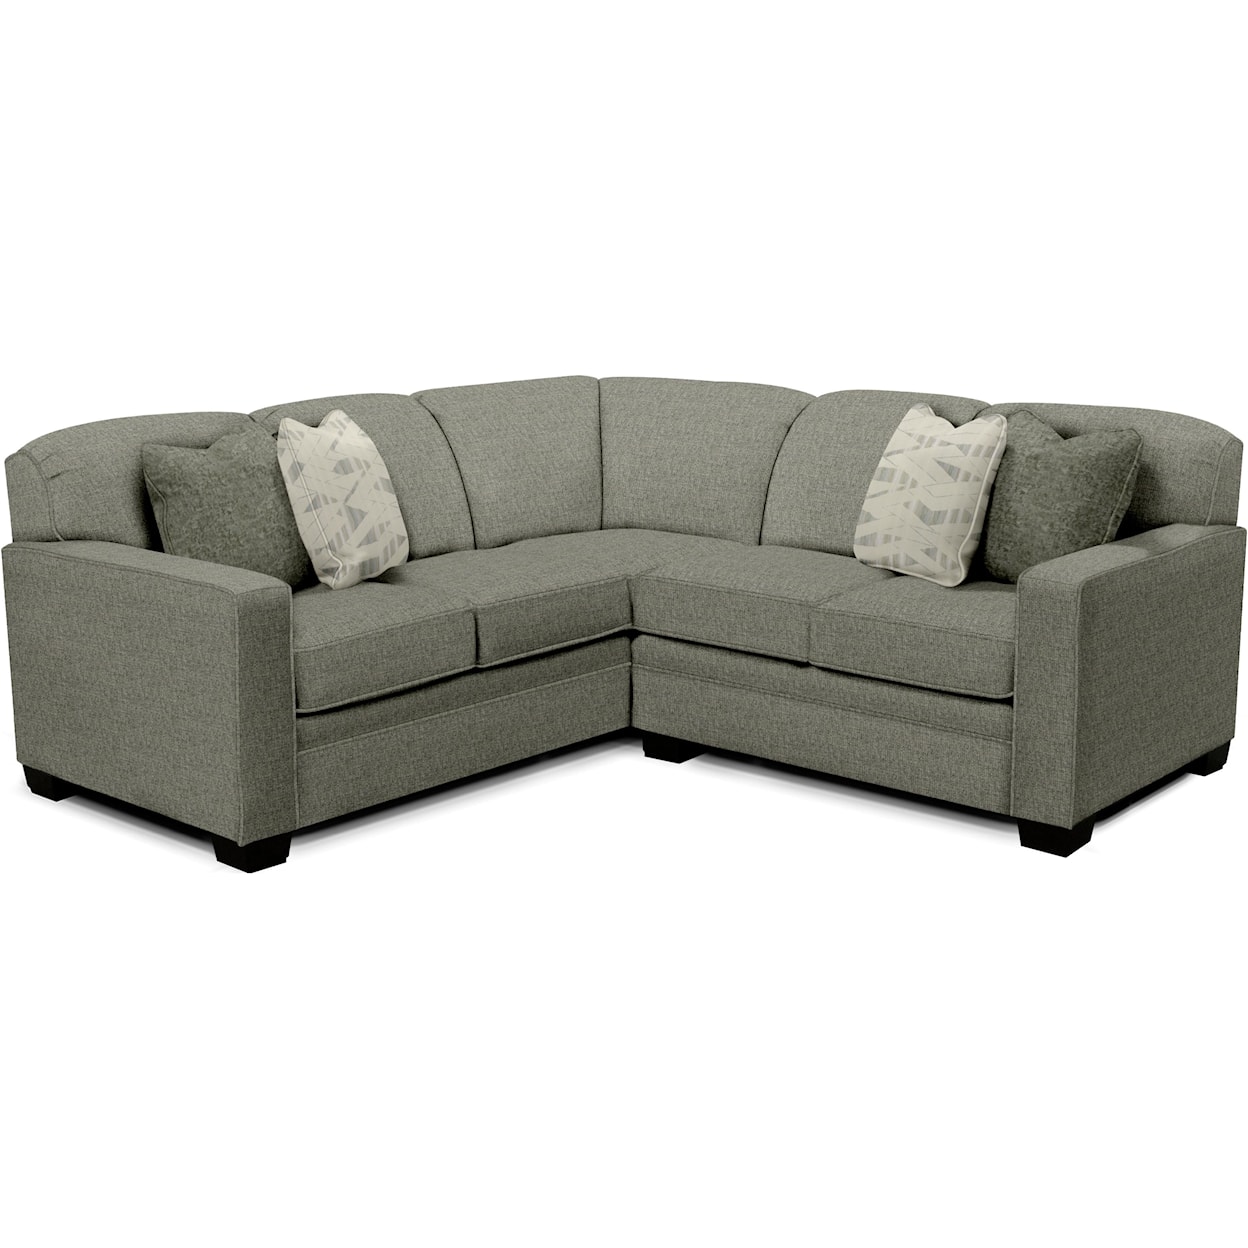 England 6000 Series Sectional